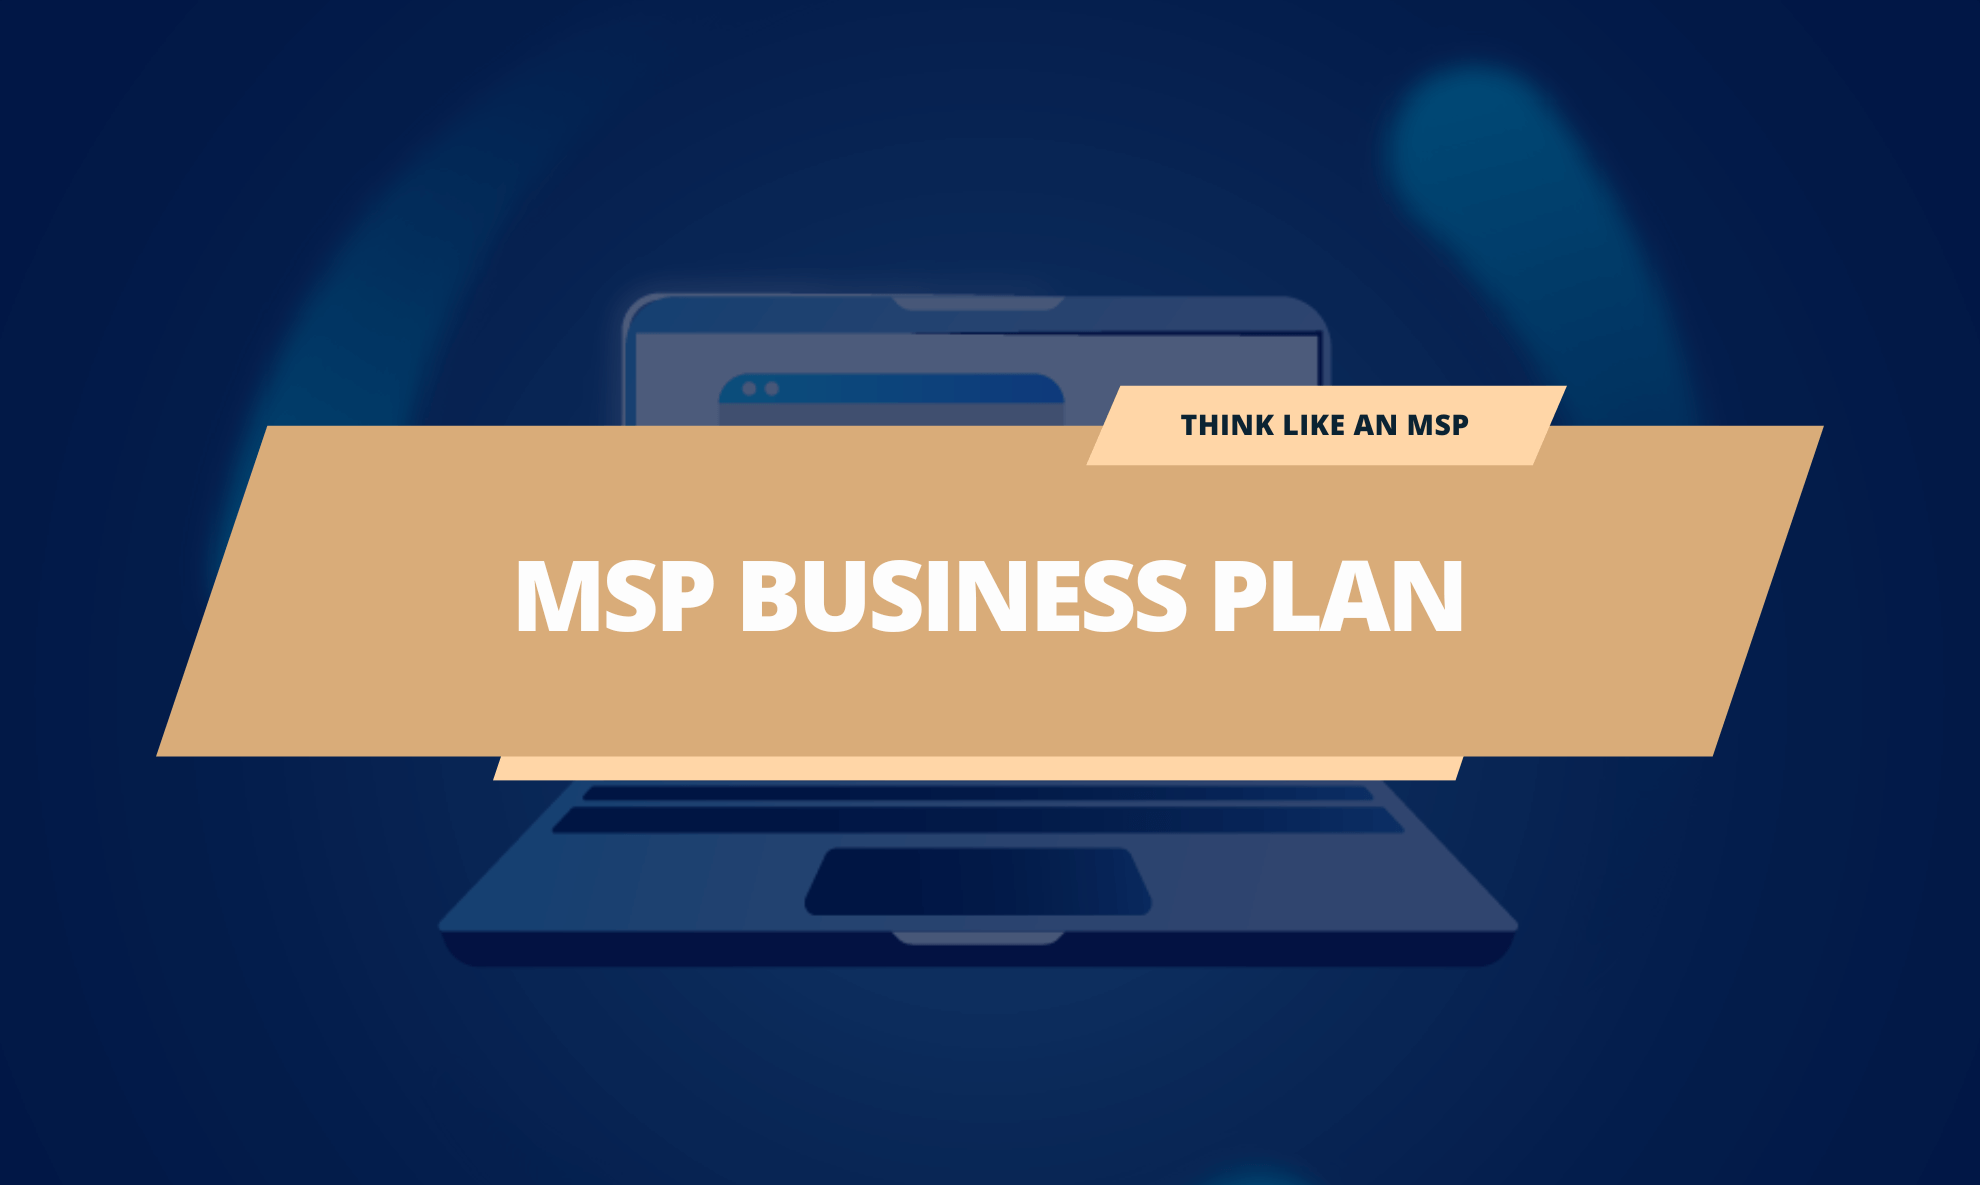 MSP Business Plan – 7 Things to Have in it